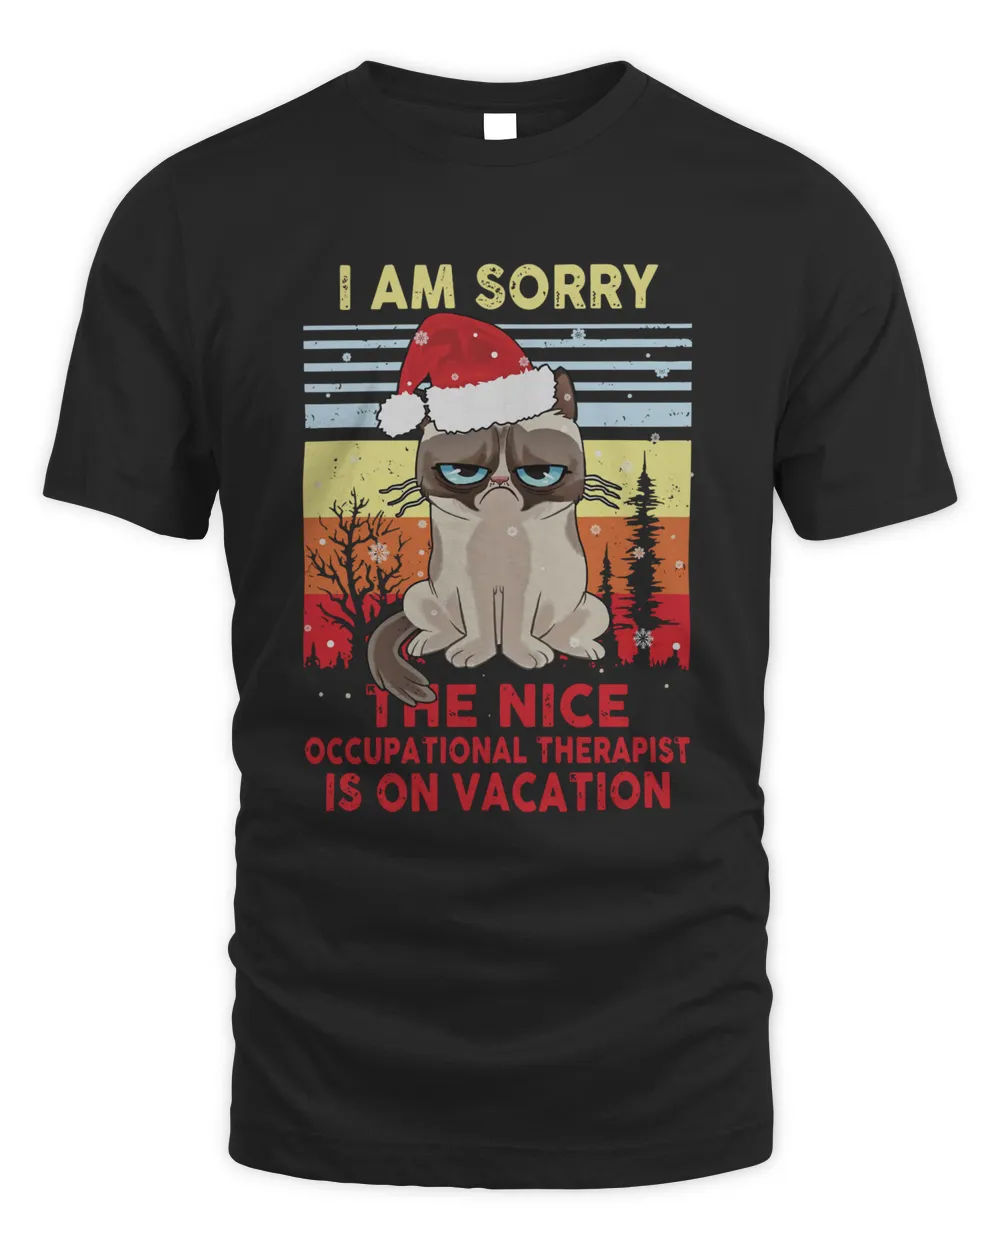 Cat Santa I Am Sorry The Nice Occupational Therapist Is On Vacation Vintage Shirt Unisex Standard T-Shirt black xl